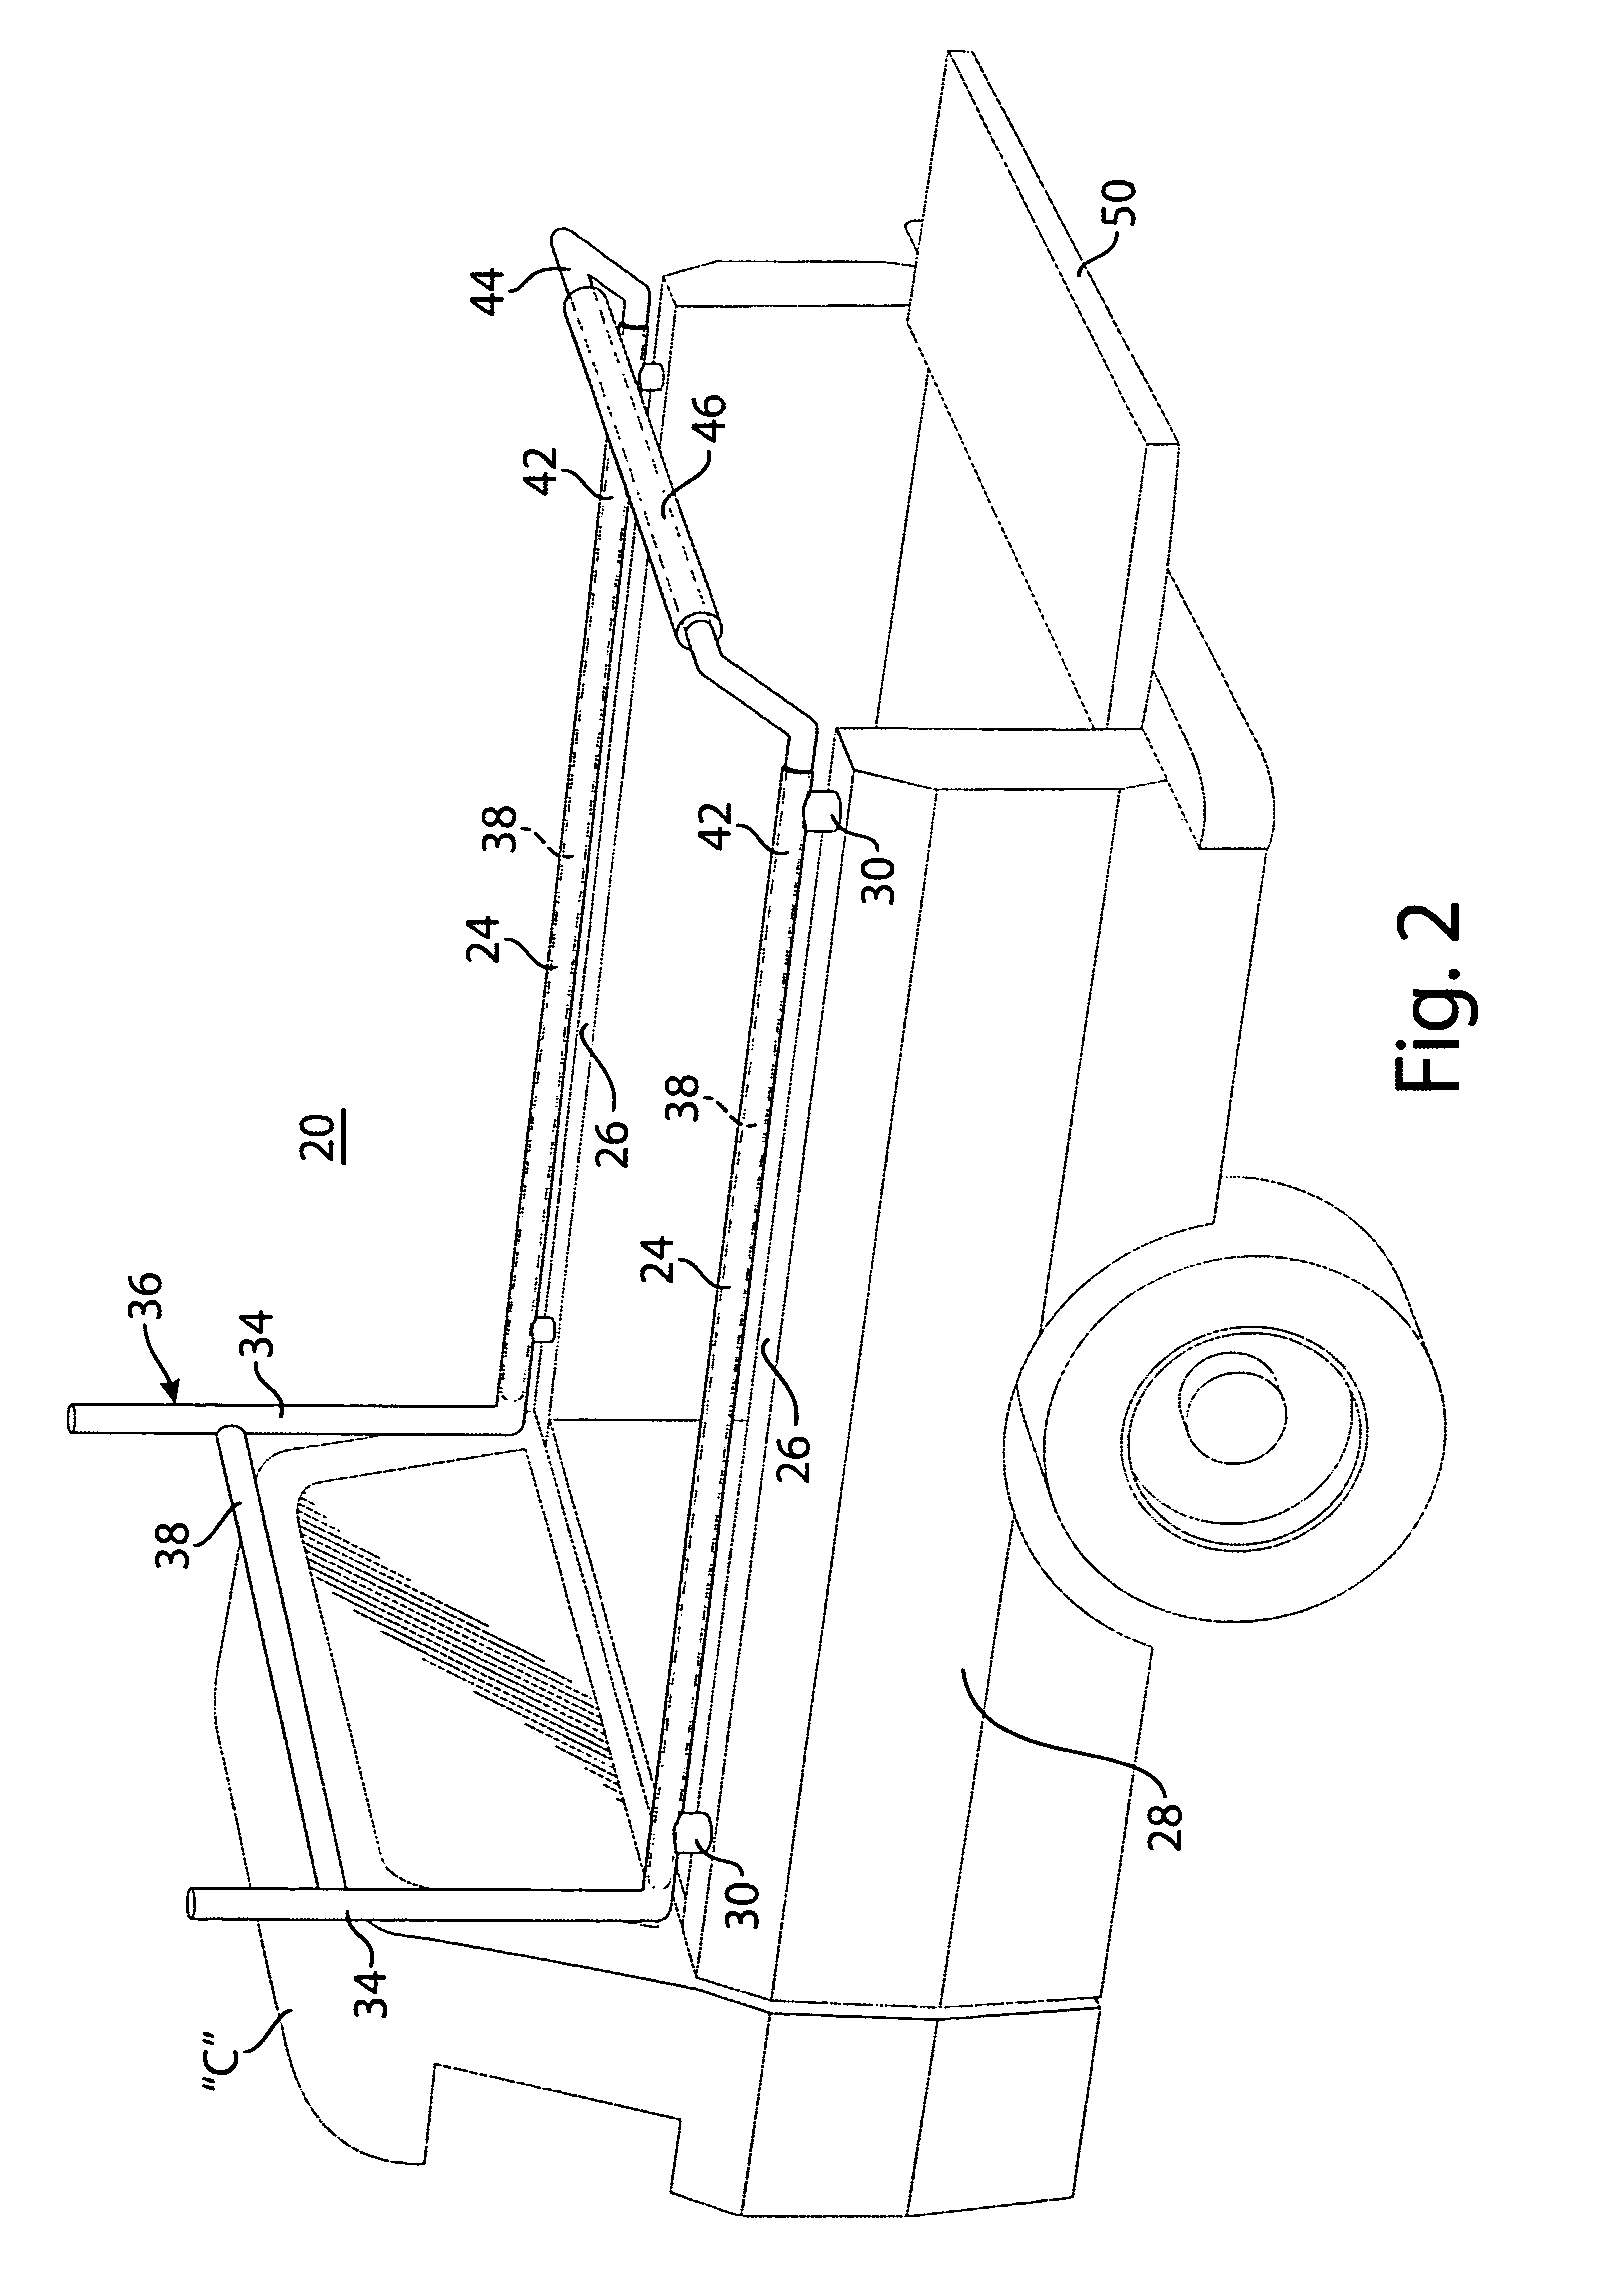 Adaptable support arrangement for a pickup truck